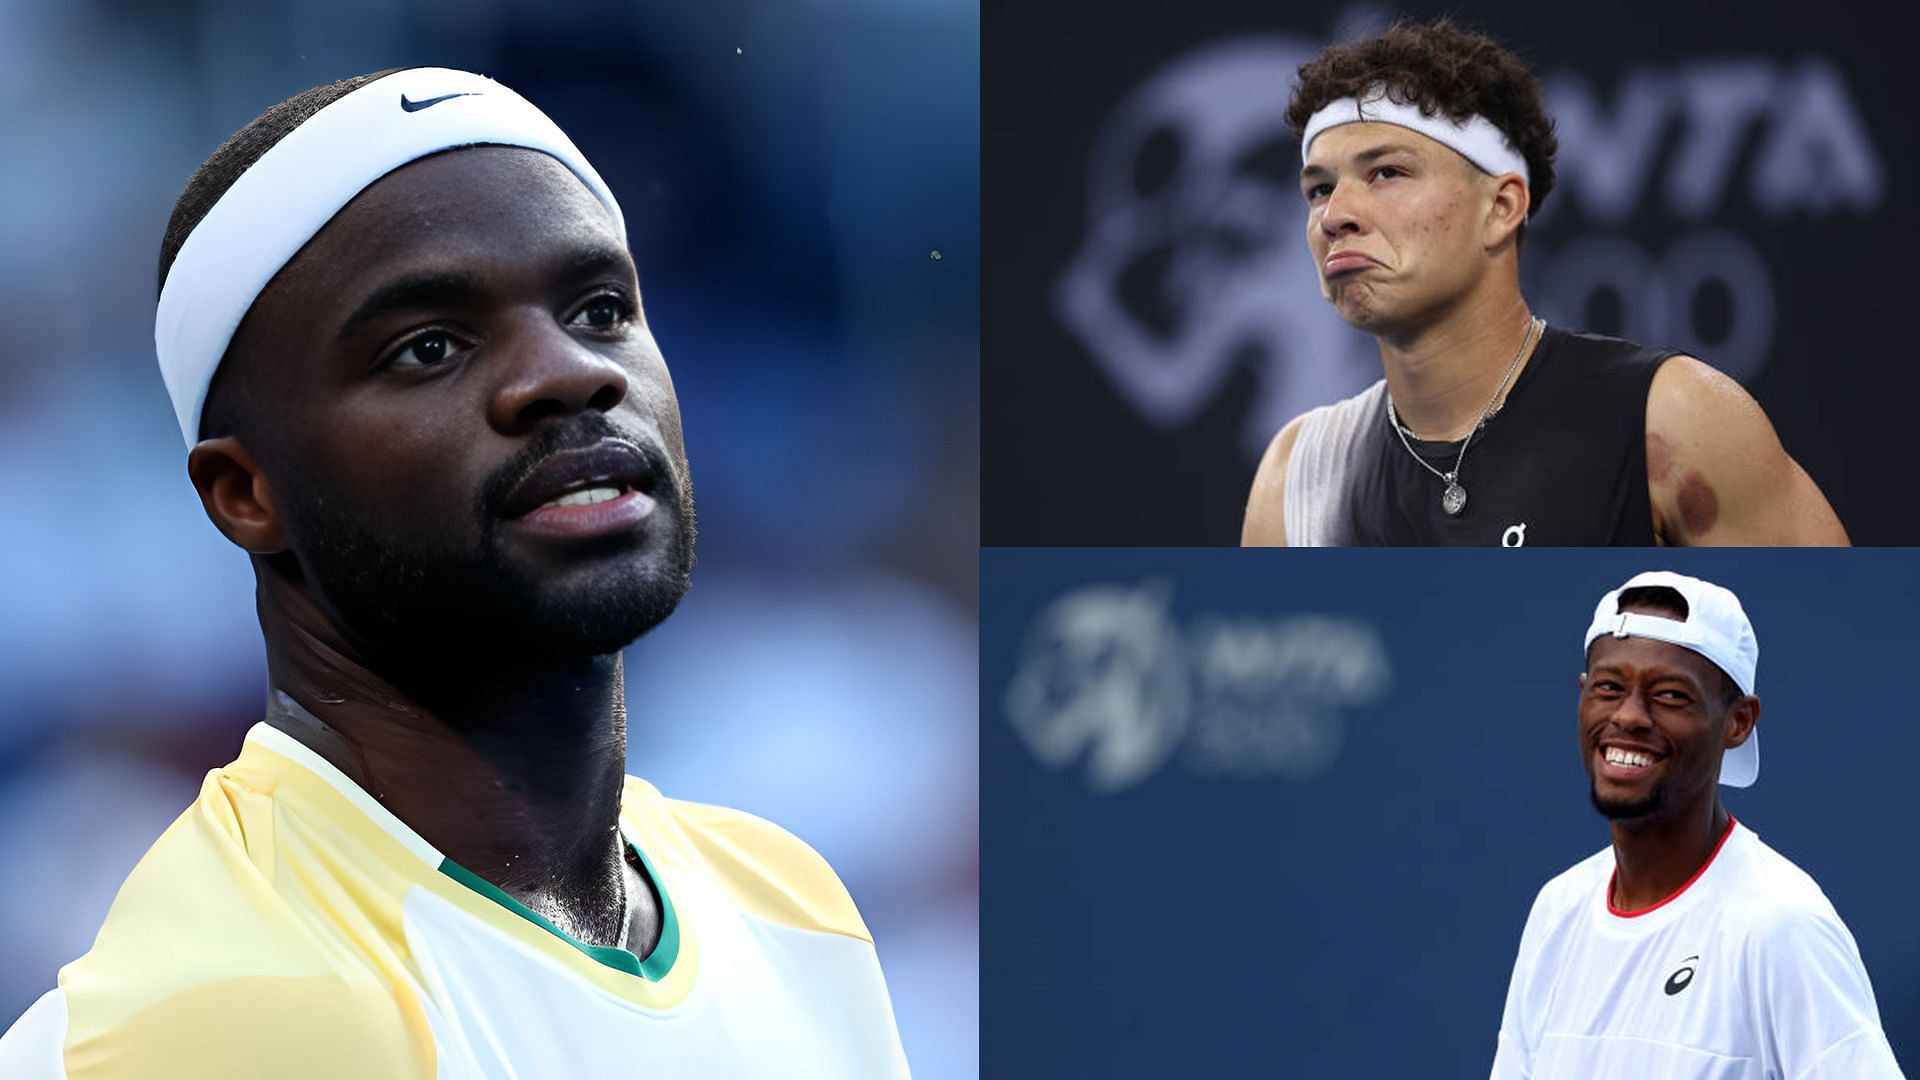 Frances Tiafoe finds himself in surprise as ATP players pick Christopher Eubanks and Ben Shelton as ideal dates for their sisters